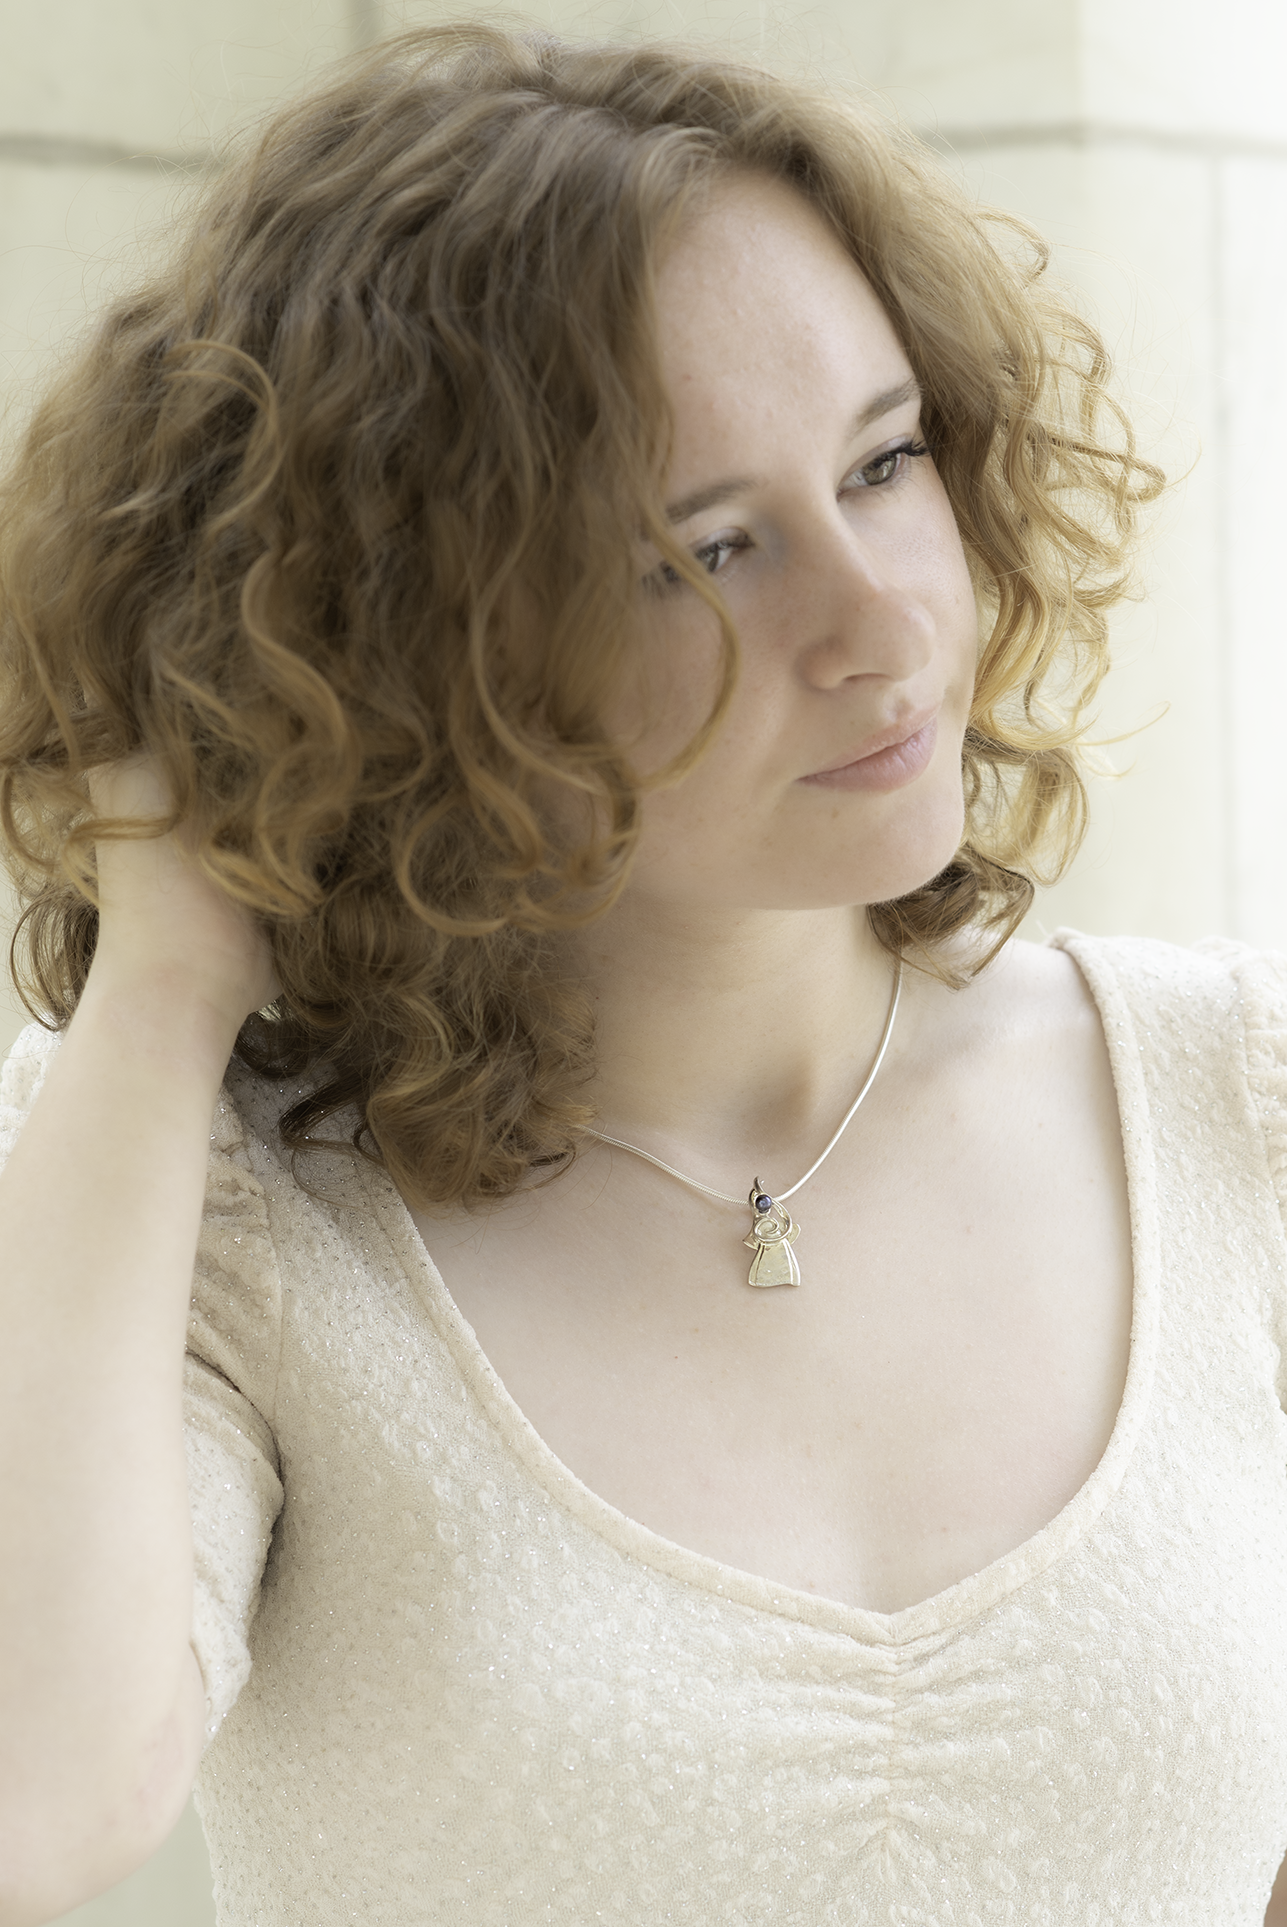 A redheaded woman wearing the Evergreen Angel Jewelry Collection